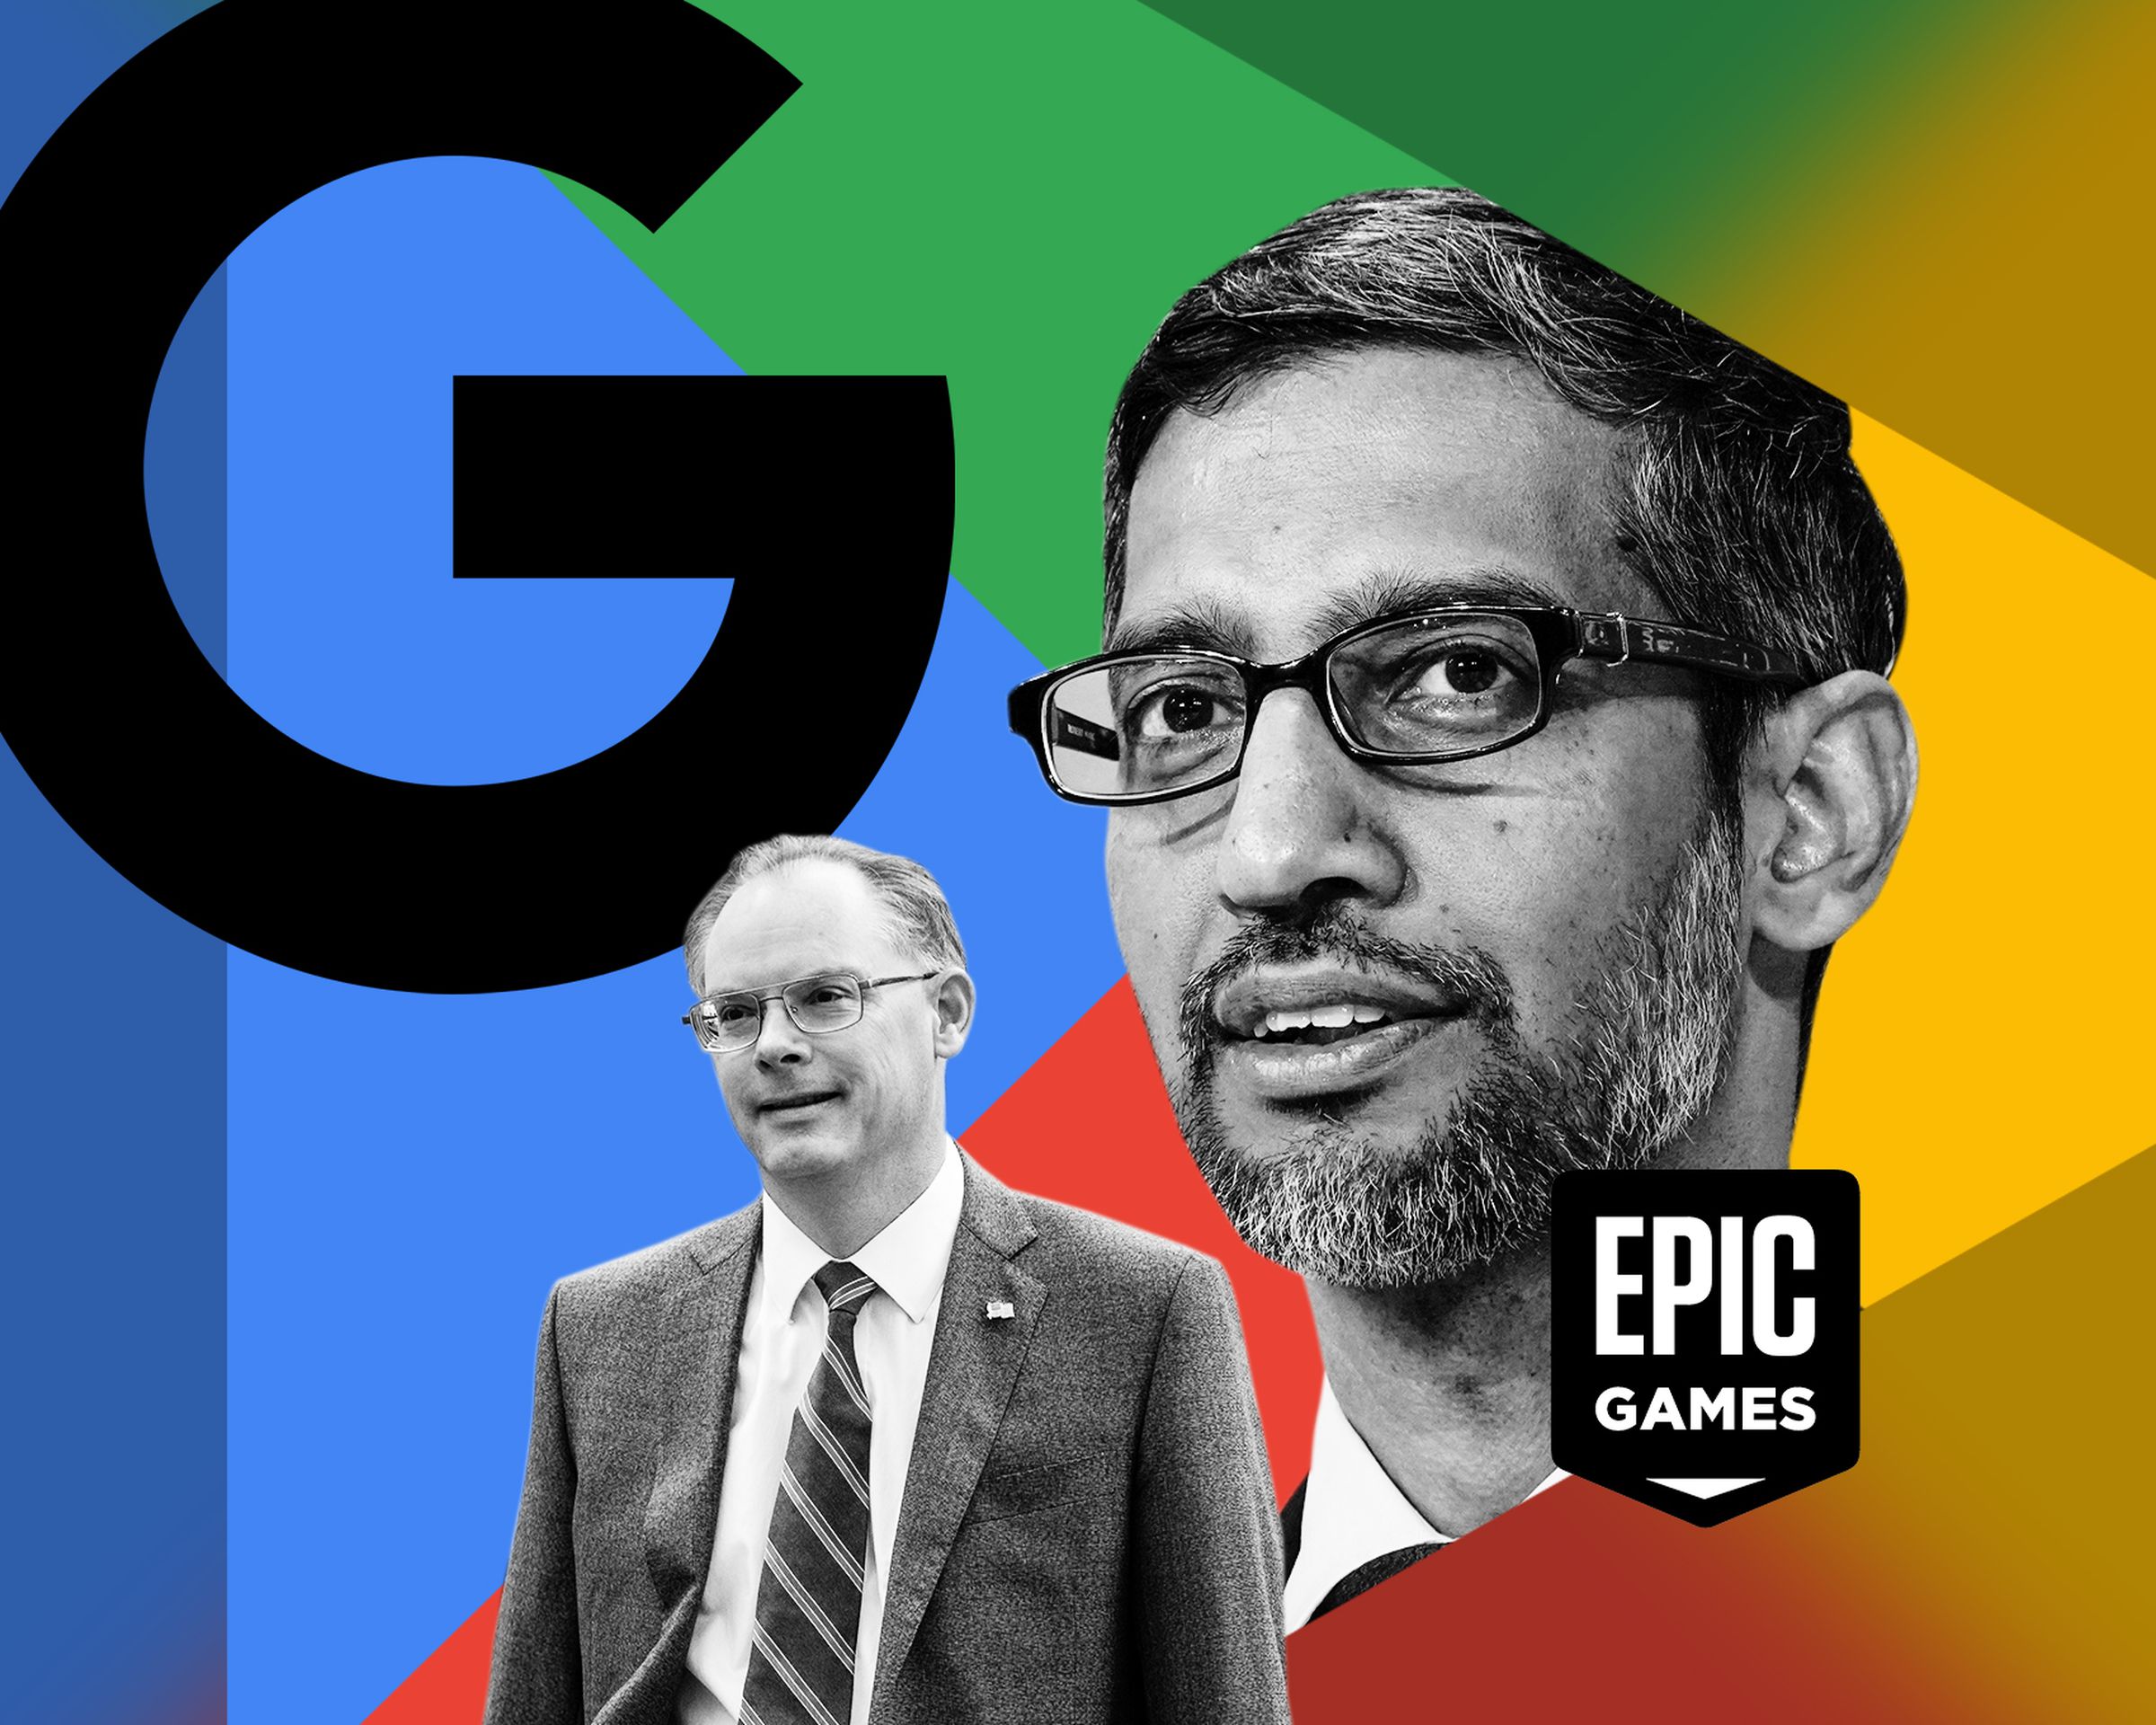 Photo illustration of Sundar Pichai and Tim Sweeney with the Google logo, Google Play logo, and the Epic Games logo.